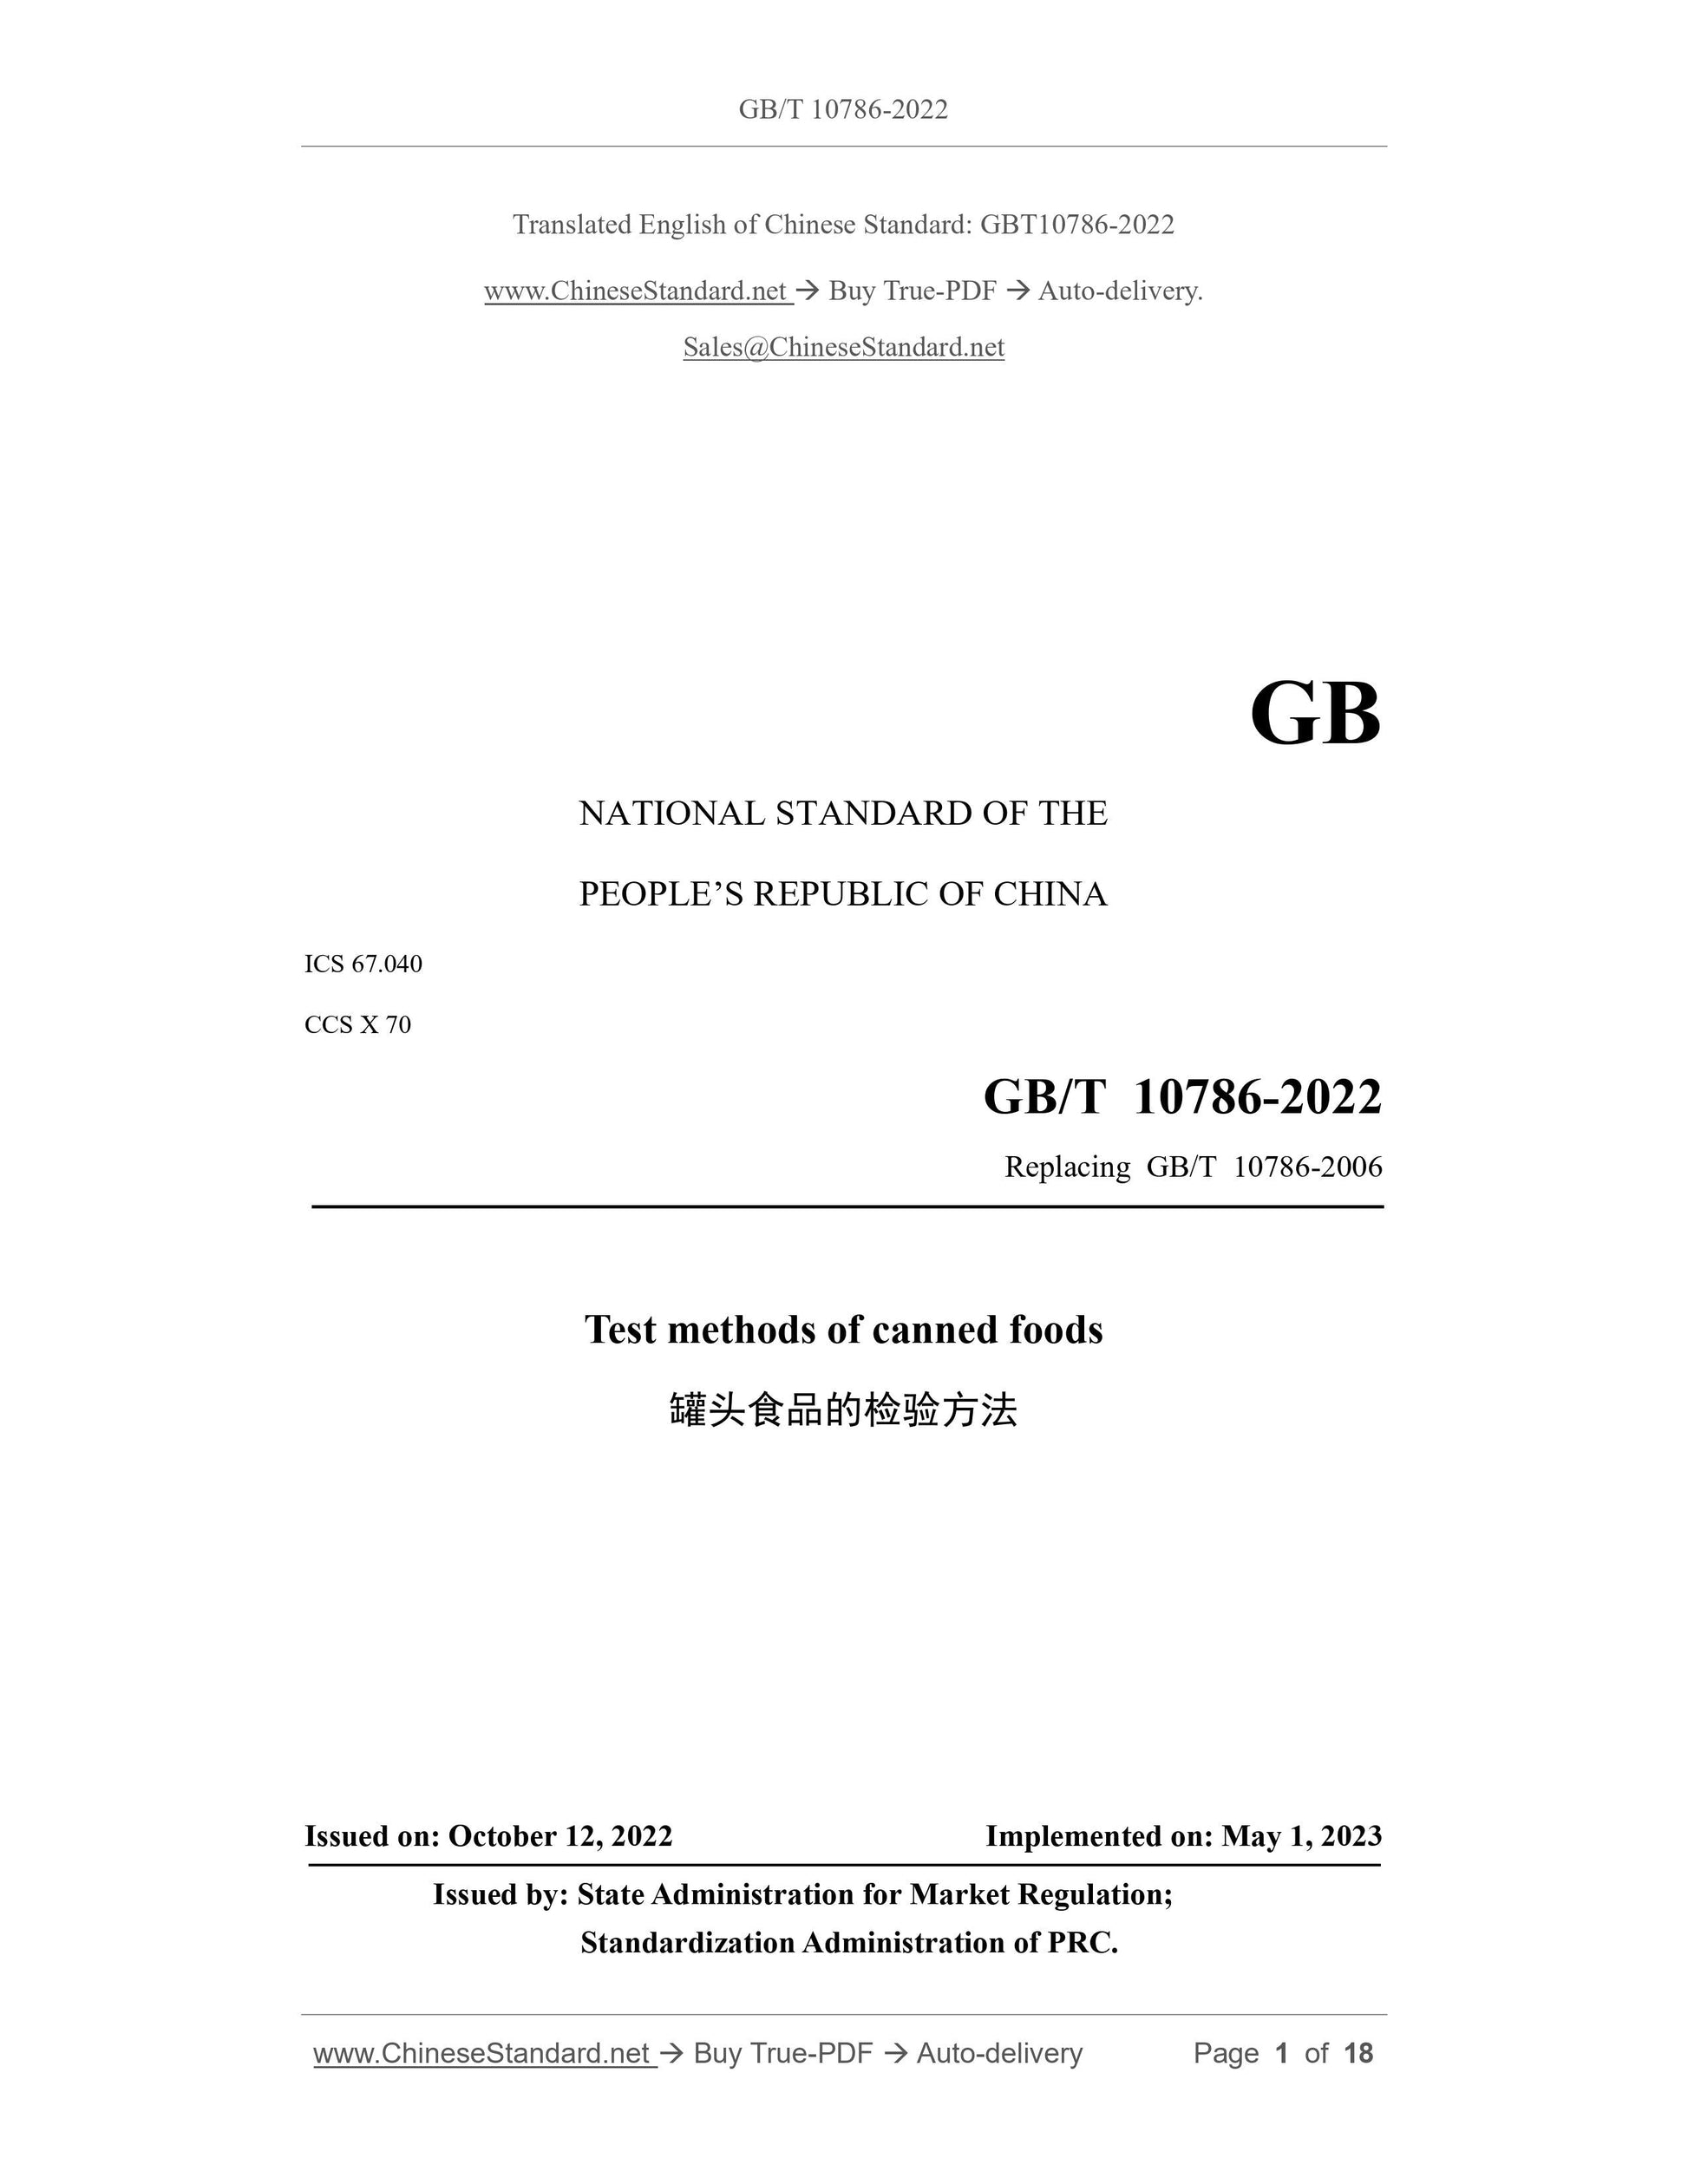 GB/T 10786-2022 Page 1